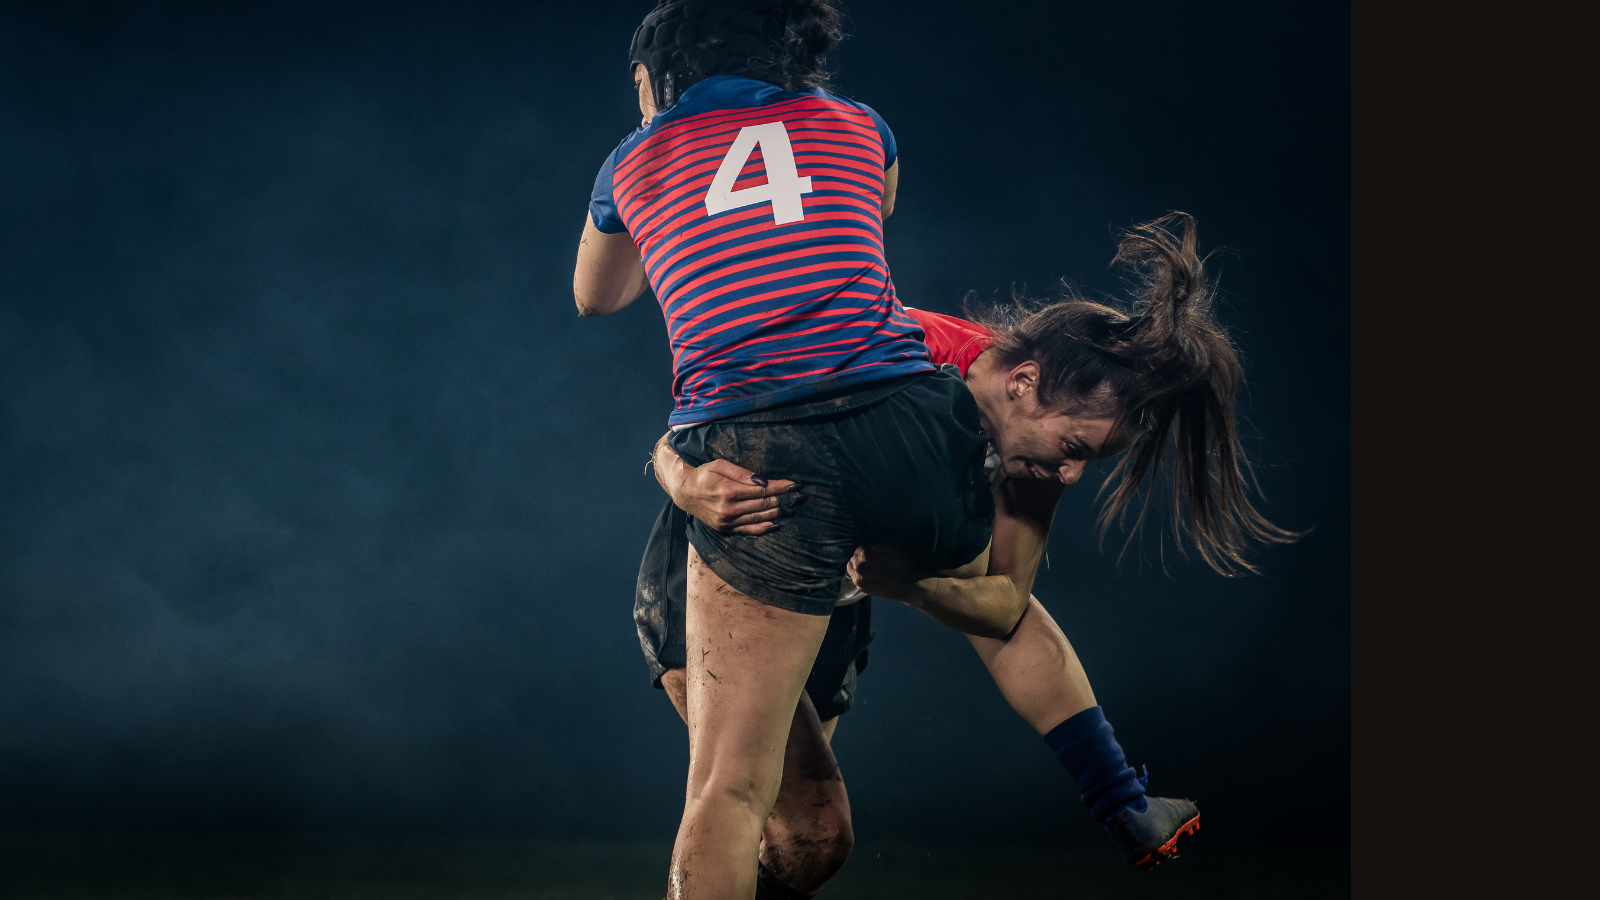 Rugby tackle injury is the most common cause of dislocation of the glenohumeral joint. 